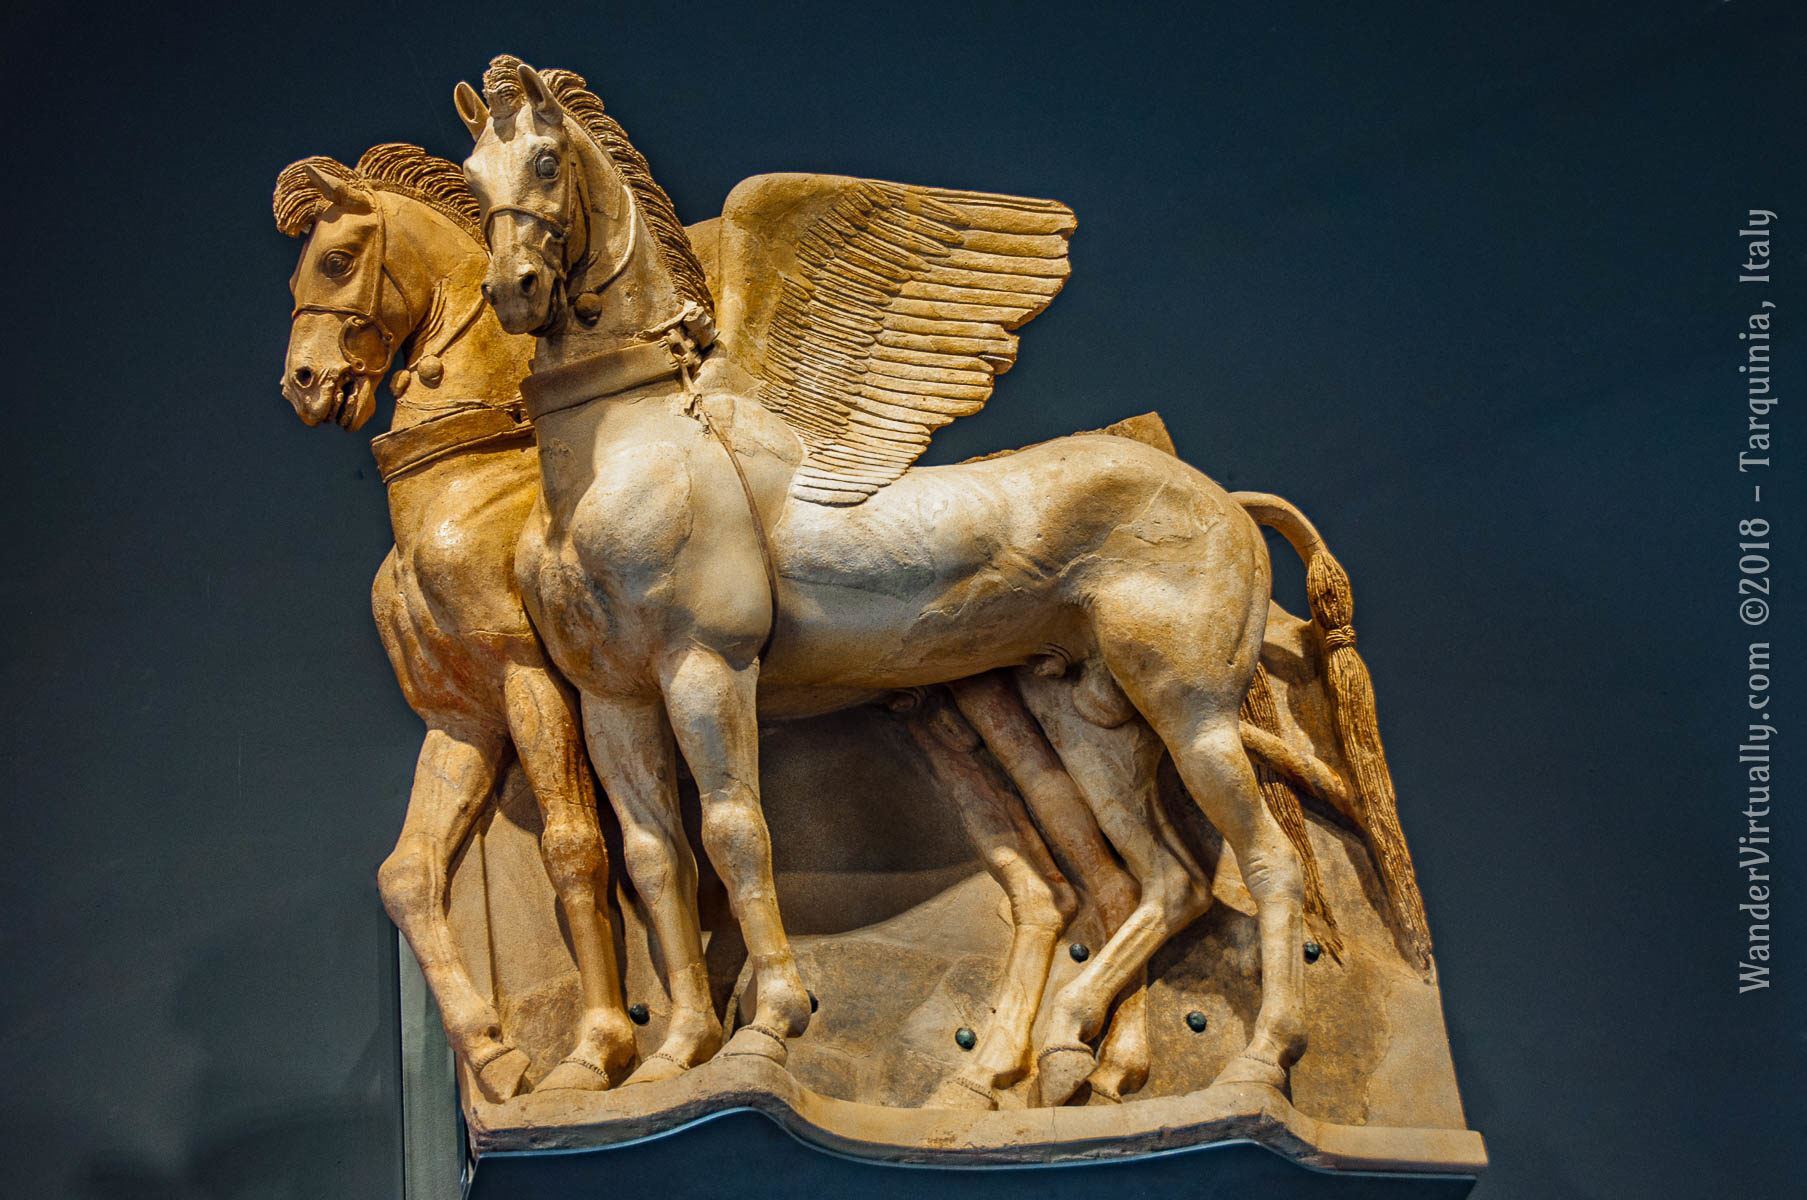 The terracotta Winged Horses of Tarquinia (4th century BCE) were found at the site of the Ara della Regina (Queen's Altar) in the Etruscan Acropolis of Tarchna. Tarquinia, Italy.